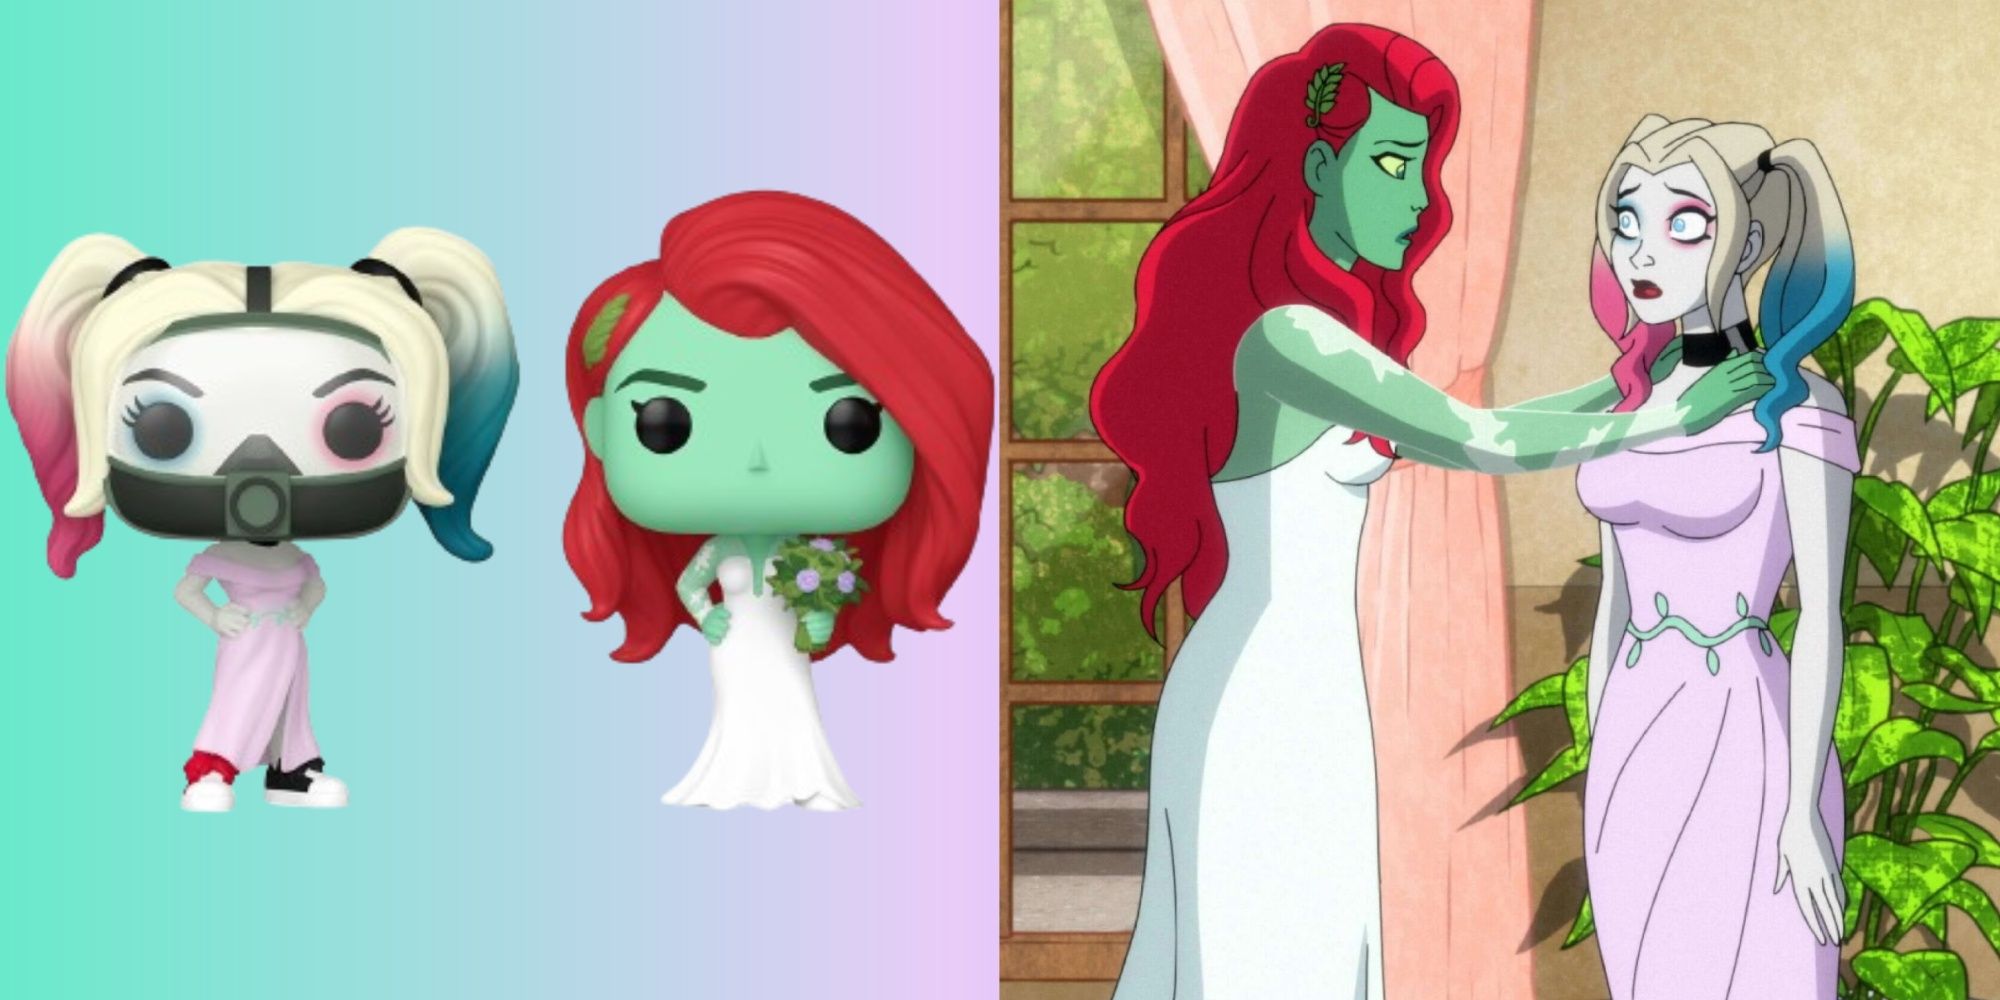 harley quinn and poison ivy funko pops, and harley quinn and poison ivy in the animated show